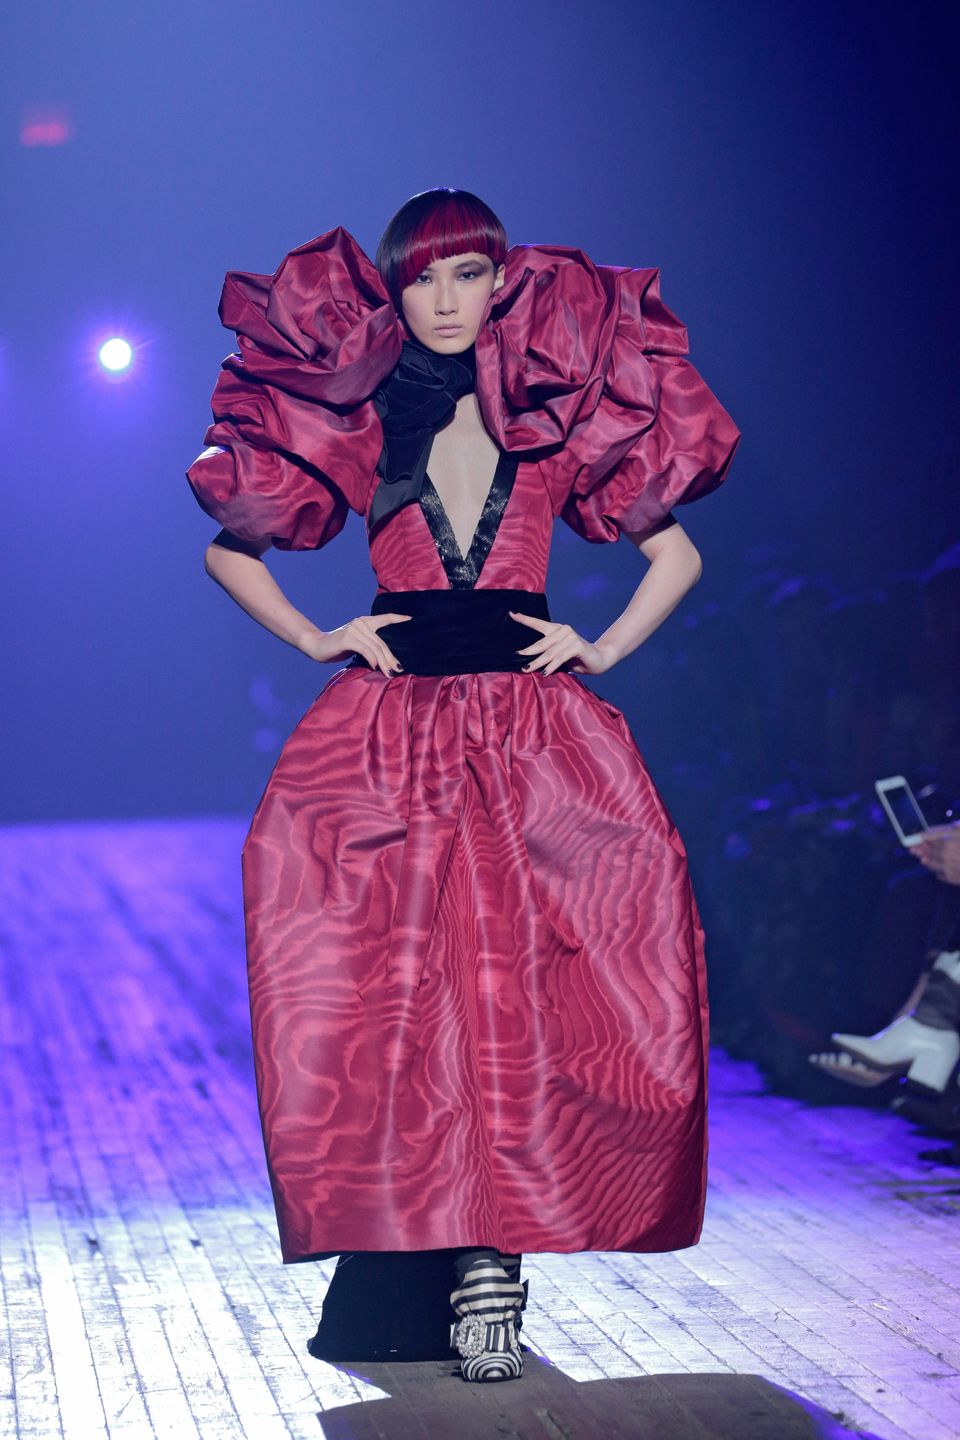 16 Of The Most Outrageous Looks From New York Fashion Week | HuffPost Life